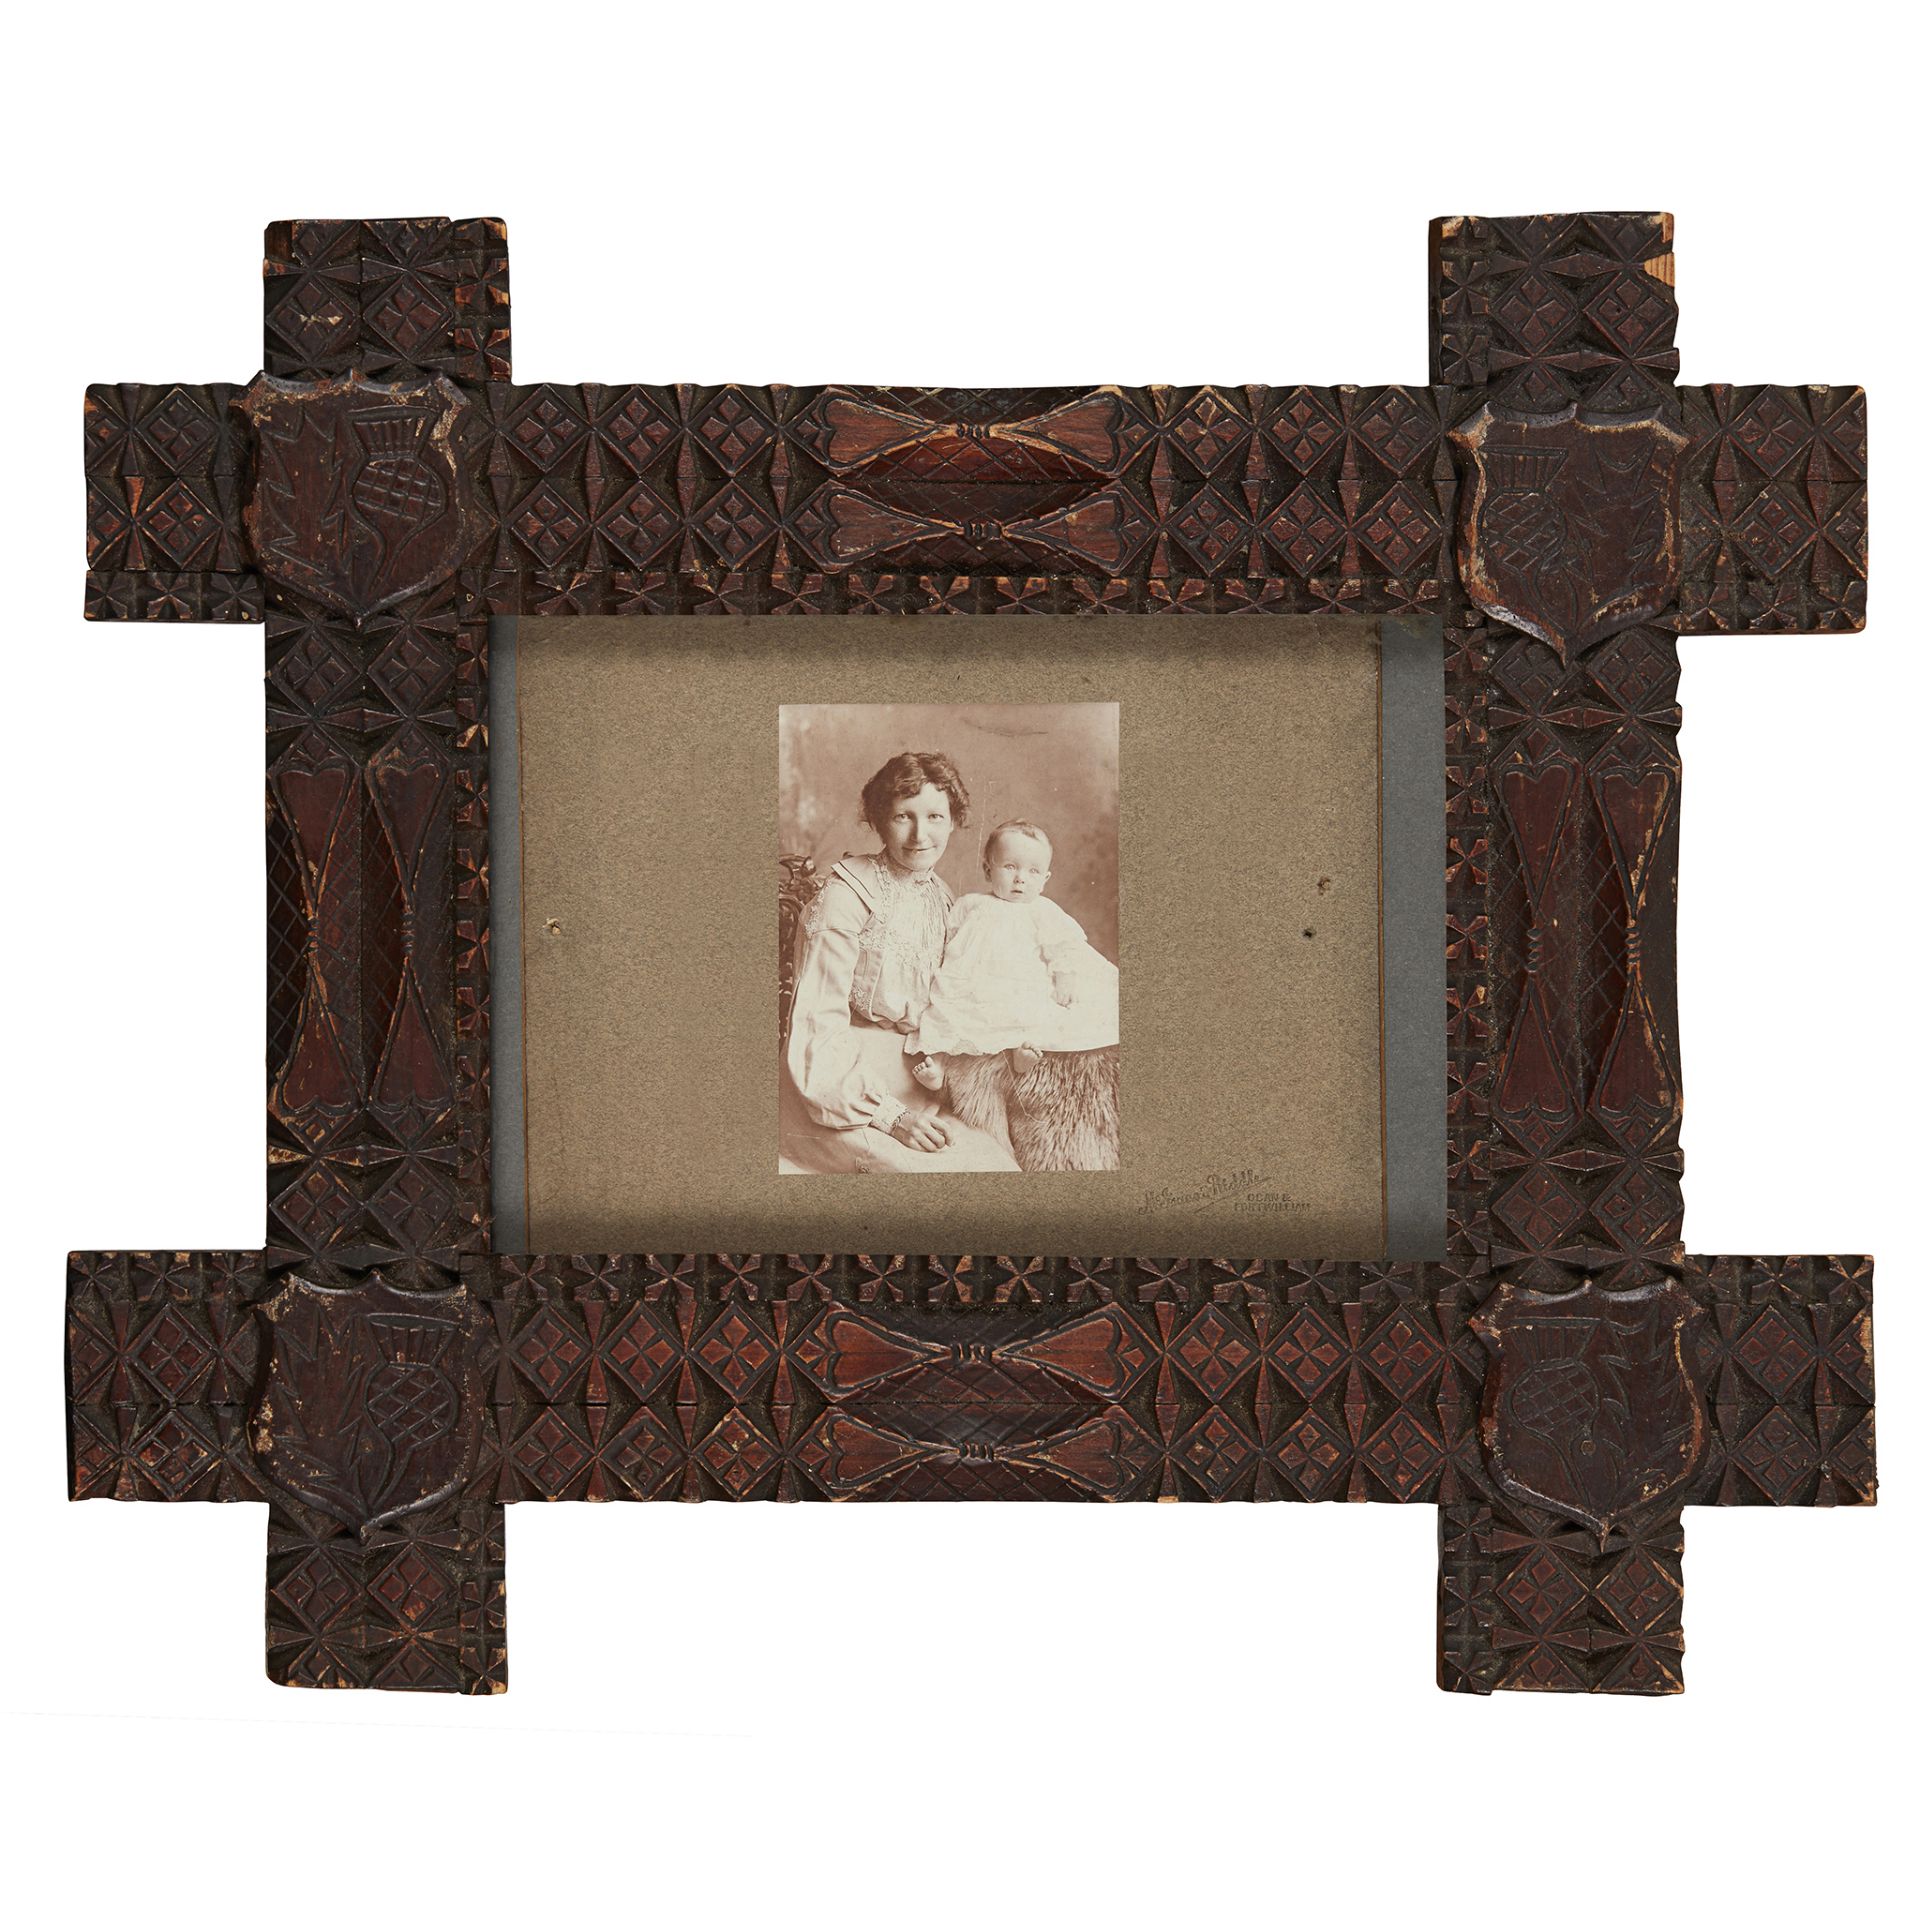 SCOTTISH LOWLANDS CHIP CARVED FRAME LATE 19TH CENTURY